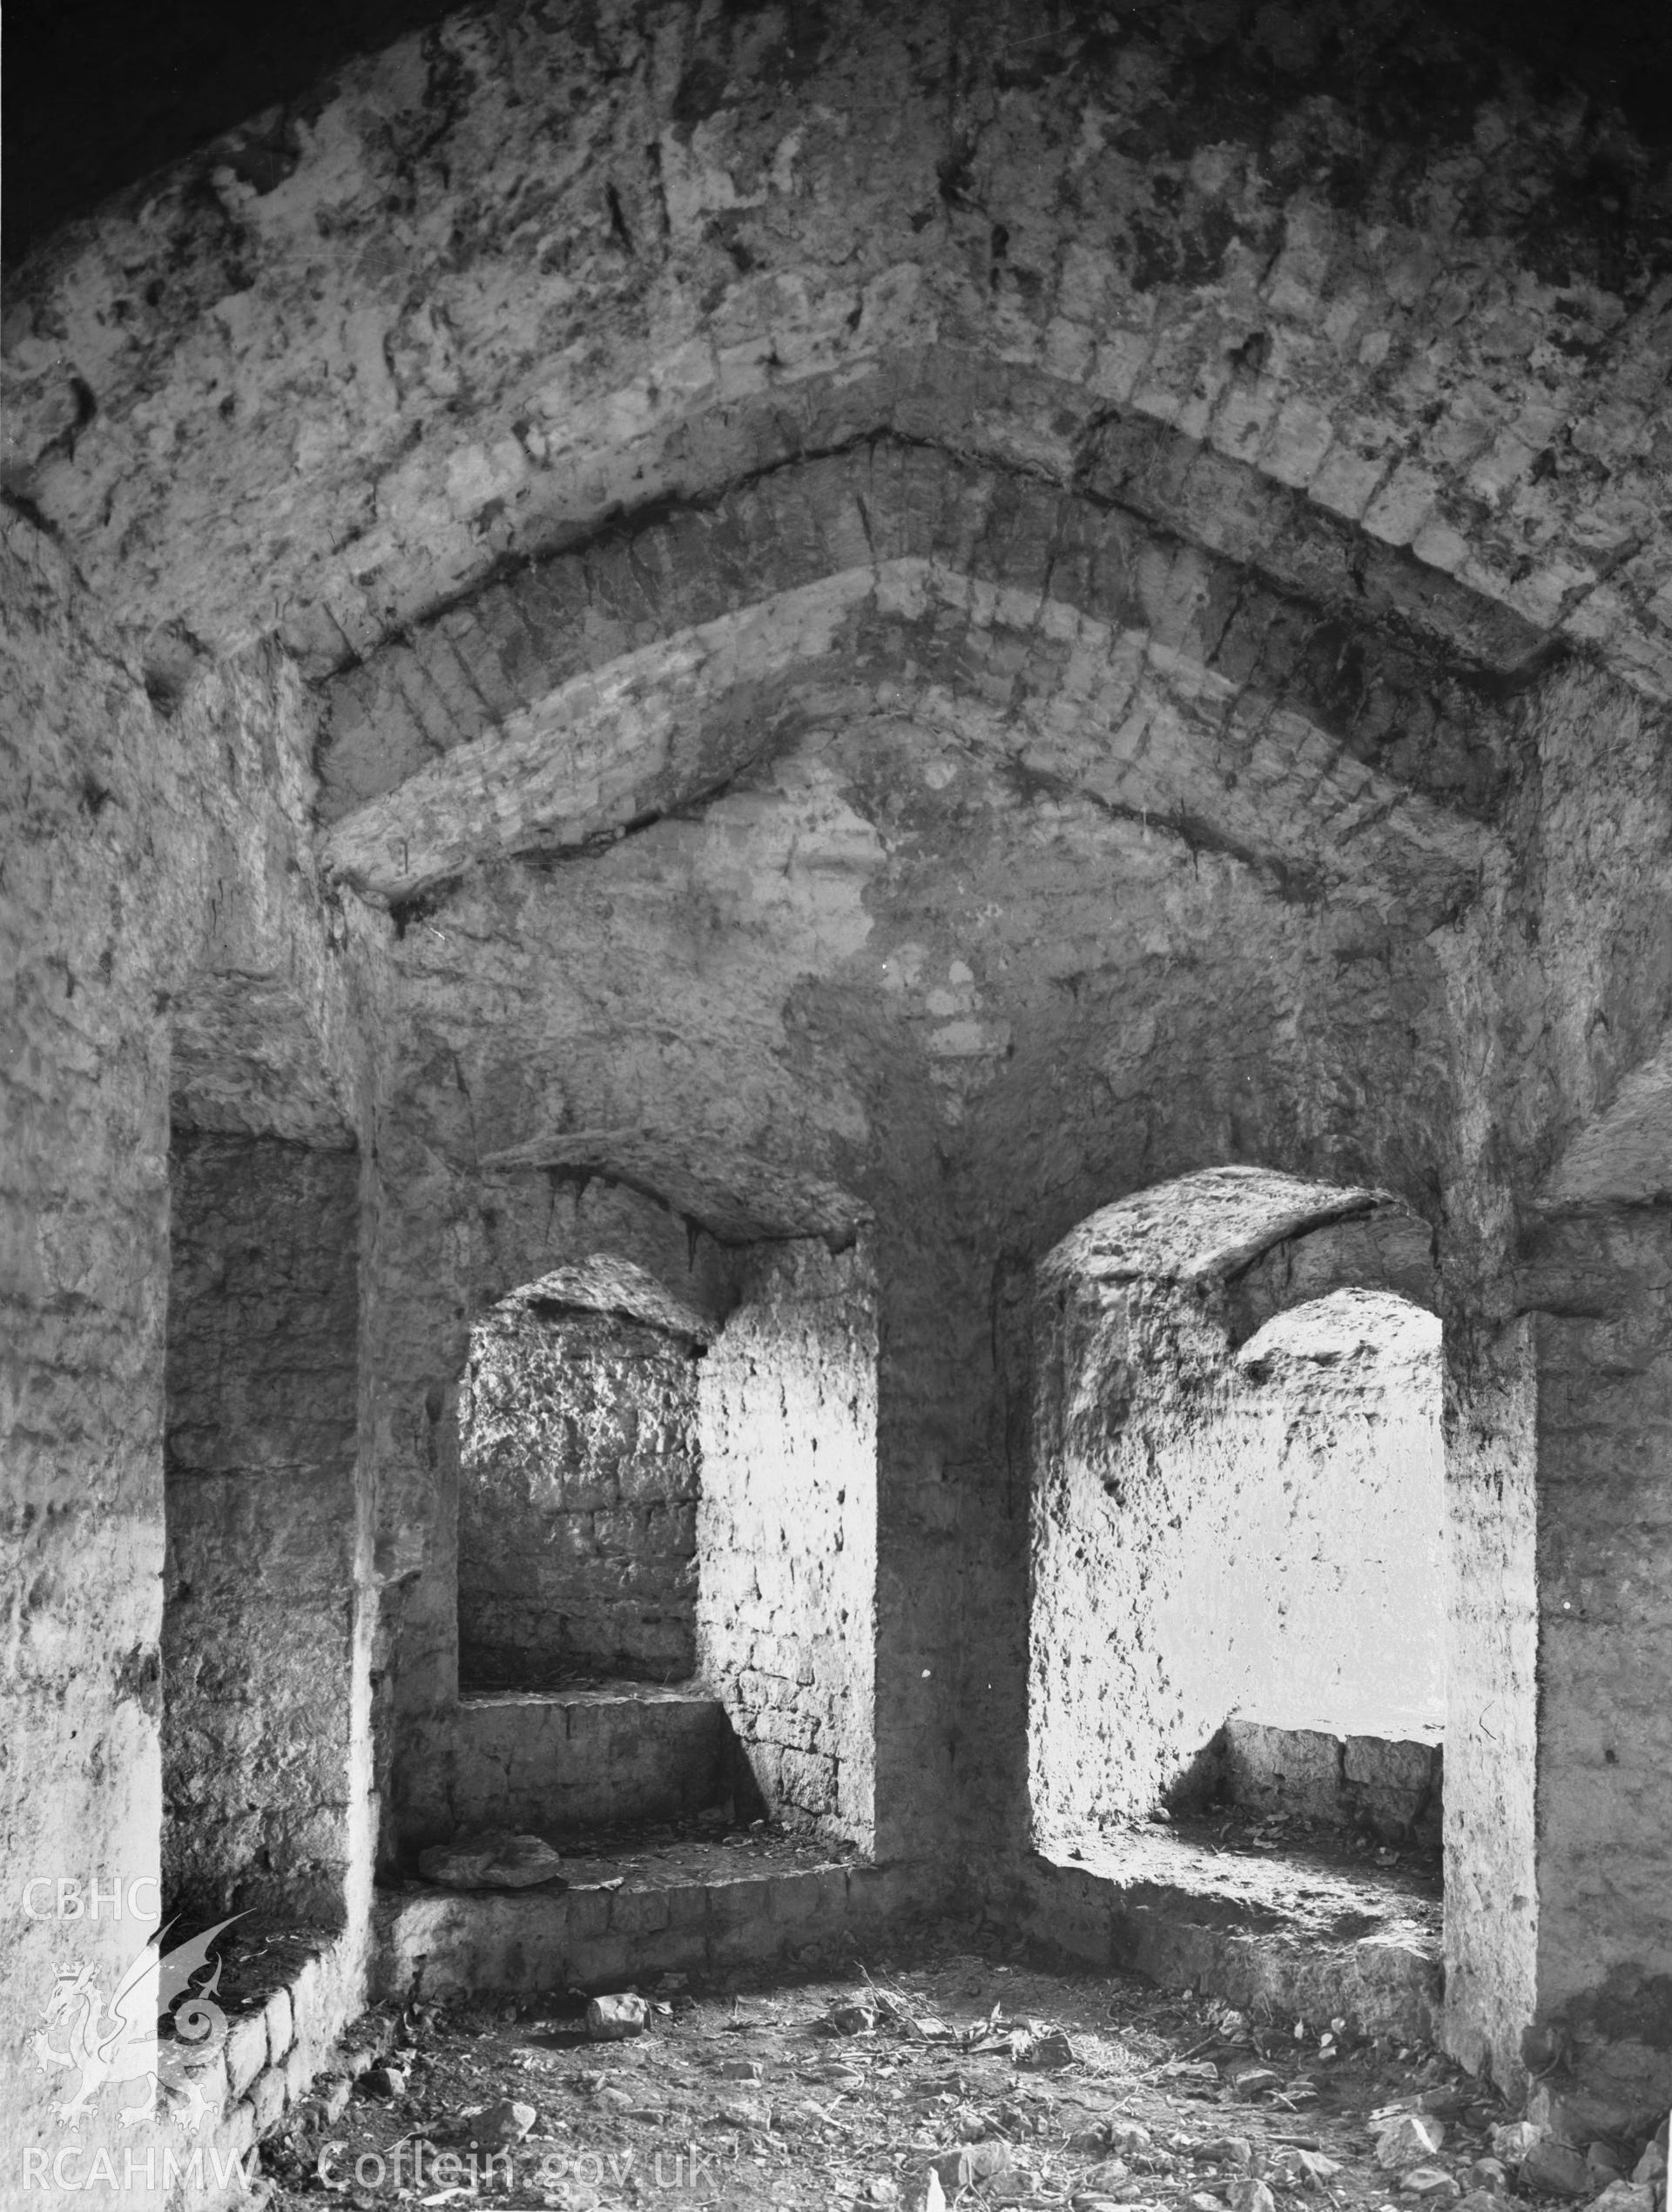 Interior view of the guardroom showing embrasures for arrow-slits and pointed ribbed vault.